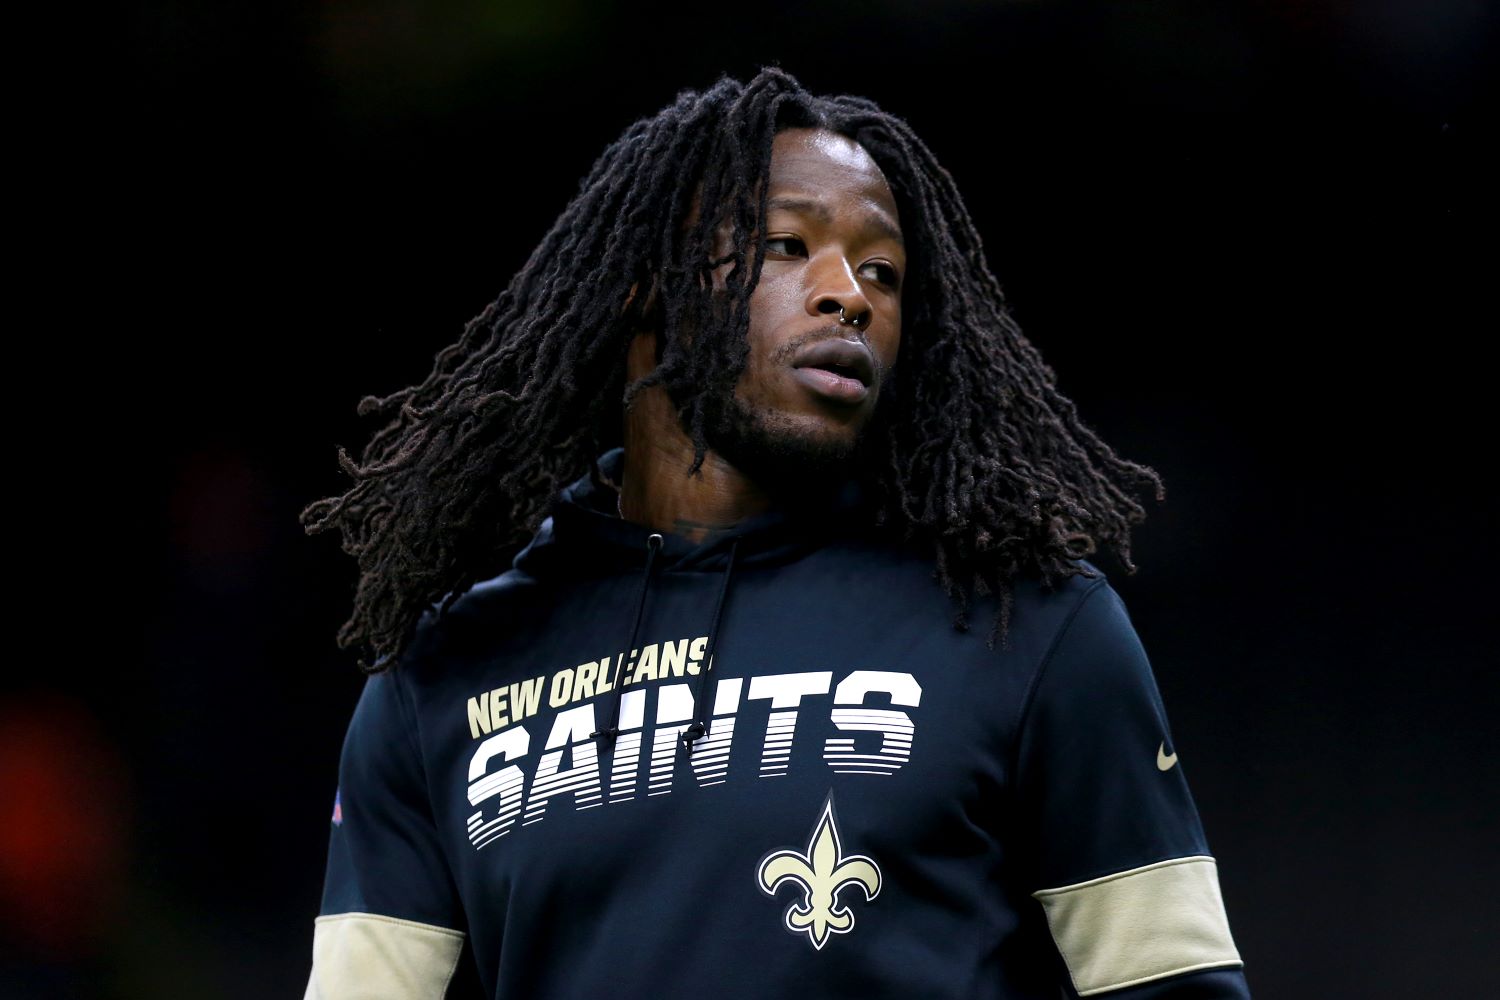 Saints RB Alvin Kamara suffered a tragic loss when his close friend died just hours after the two had made plans to reunite.